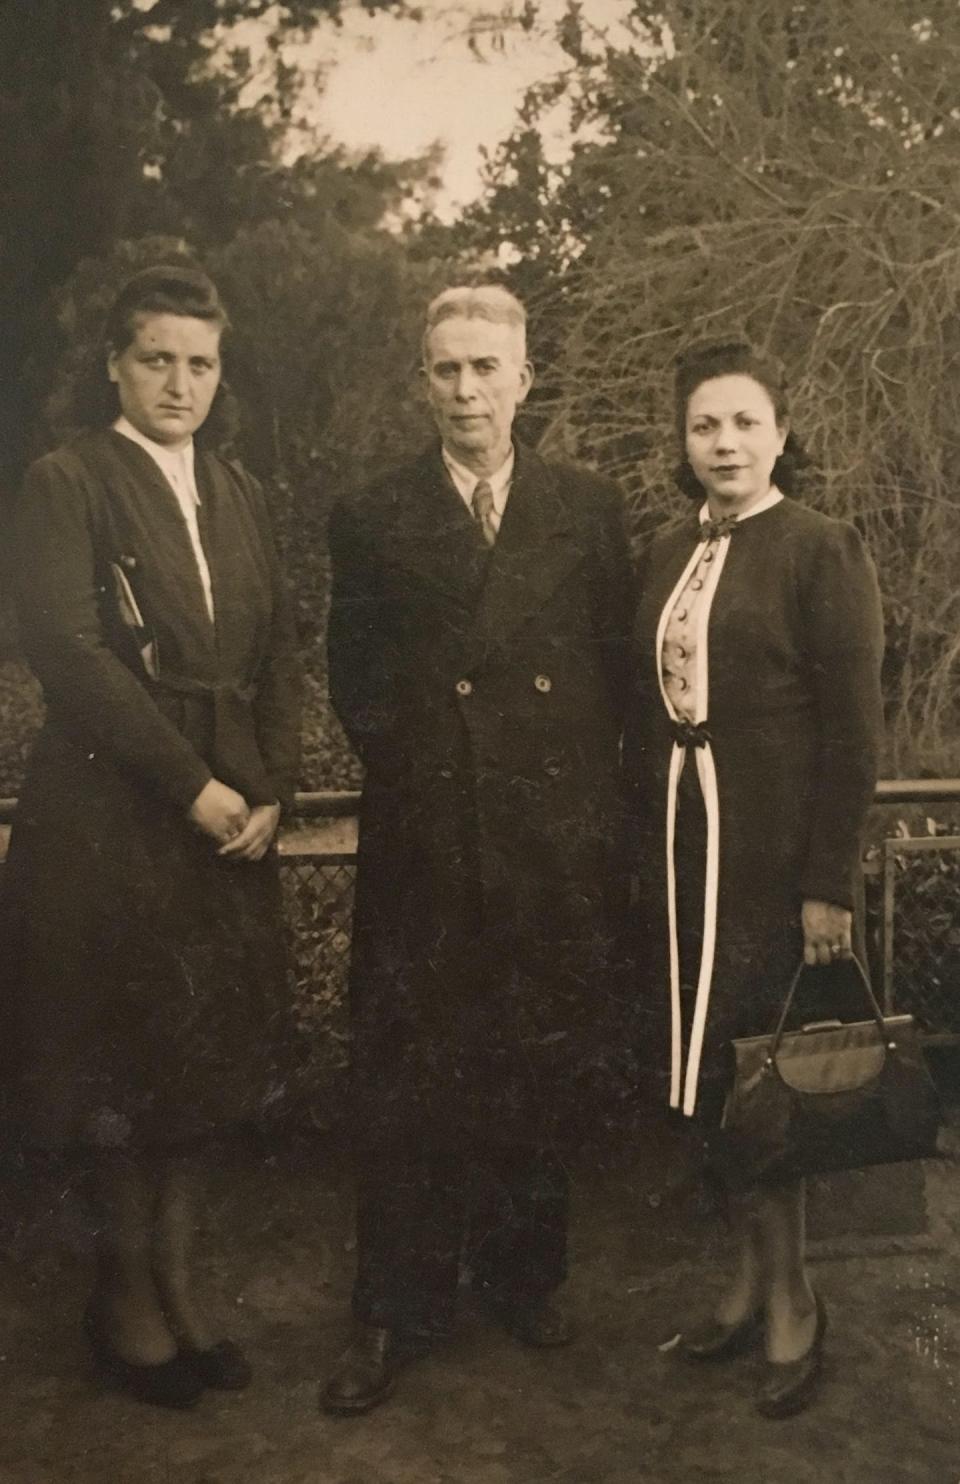 Vitaly Hasson’s wife, Regina Hasson, his father, Aron Hasson and sister, Julie (née Hasson) Sarfatti, 1946 in Salonica. Farrar, Straus and Giroux, from Family Papers: a Sephardic Journey Through the Twentieth Century, Author provided